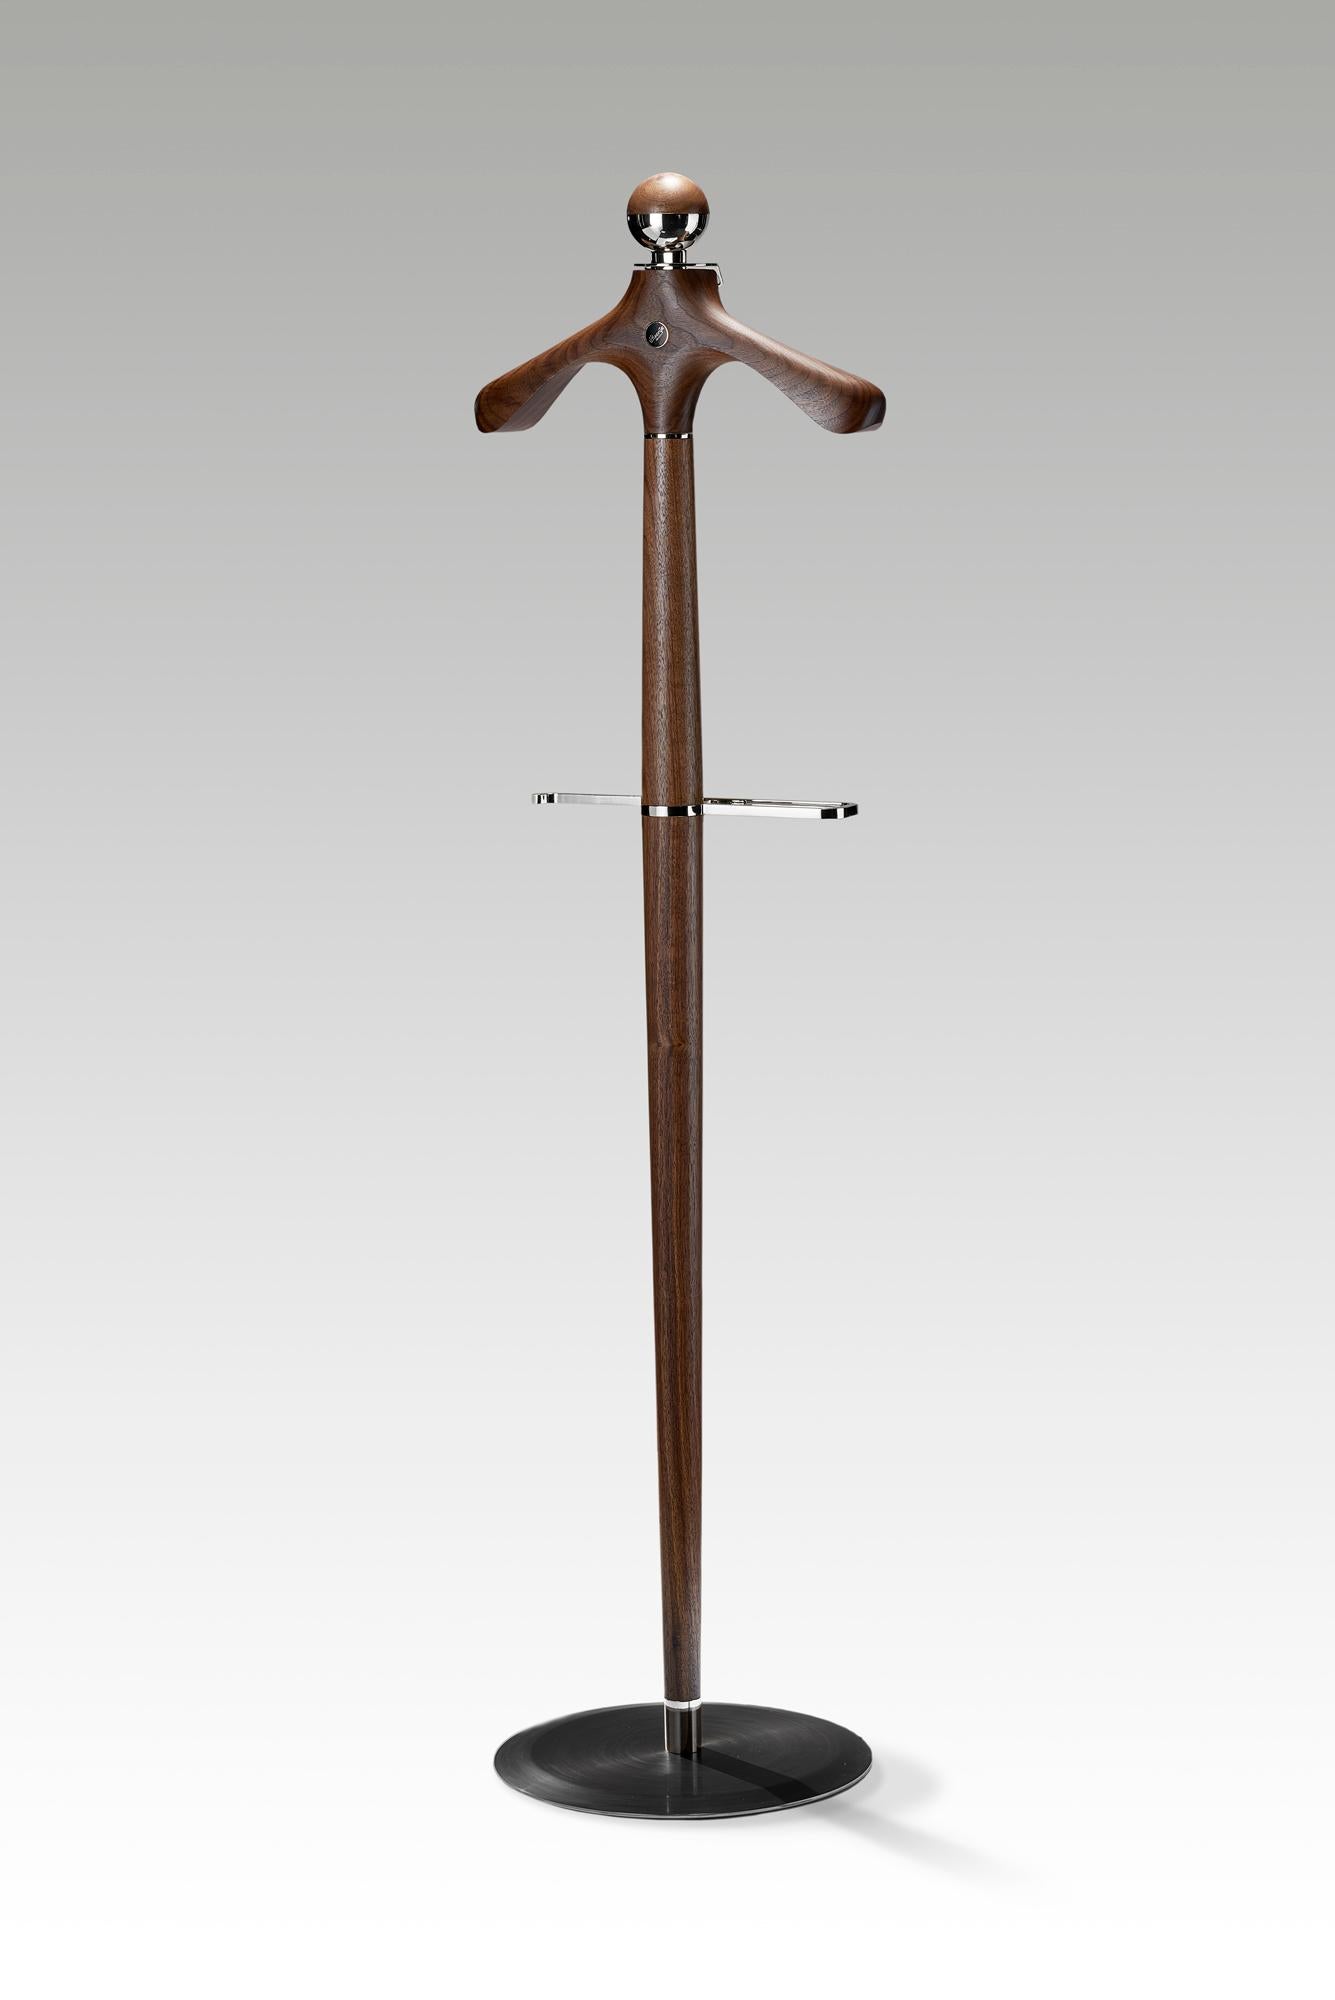 The essential valet stand preserves all the finest features of our series of products and provides new uses while saving space at home or in the office.

On this piece, which has become our calling card, you find a coat hanger sculpted from a